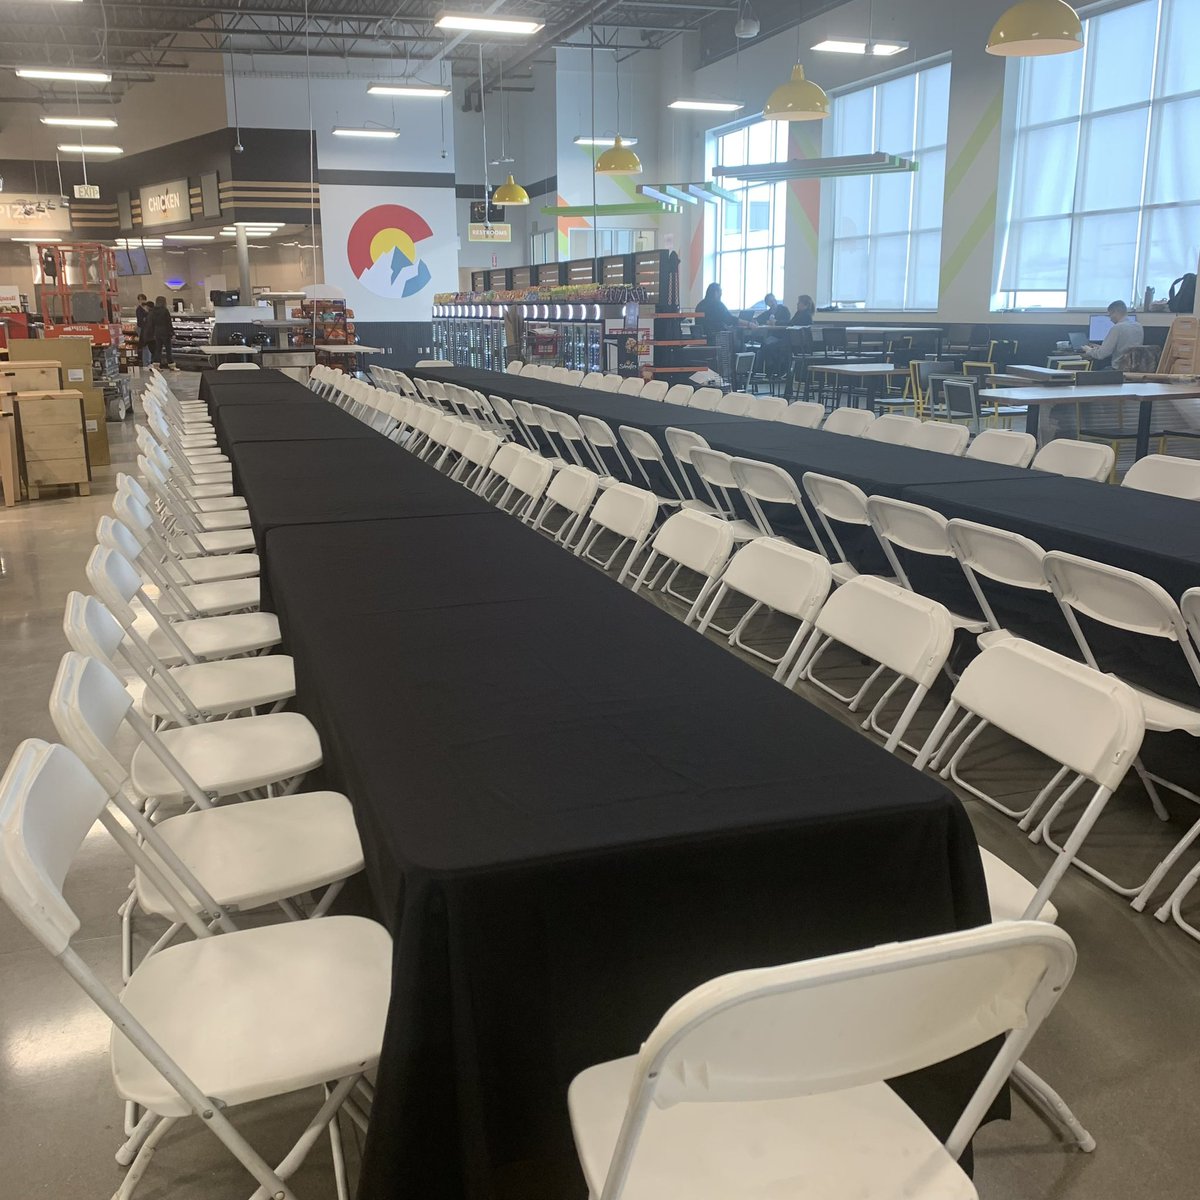 We were happy to setup the new employee appreciation event for the NEW KING SOOPERS in Thornton today! We as residence of the area are excited to have this new store open, and appreciate them for contacting us for their rentals for the event! #kingsoopers #thorntoncolorado